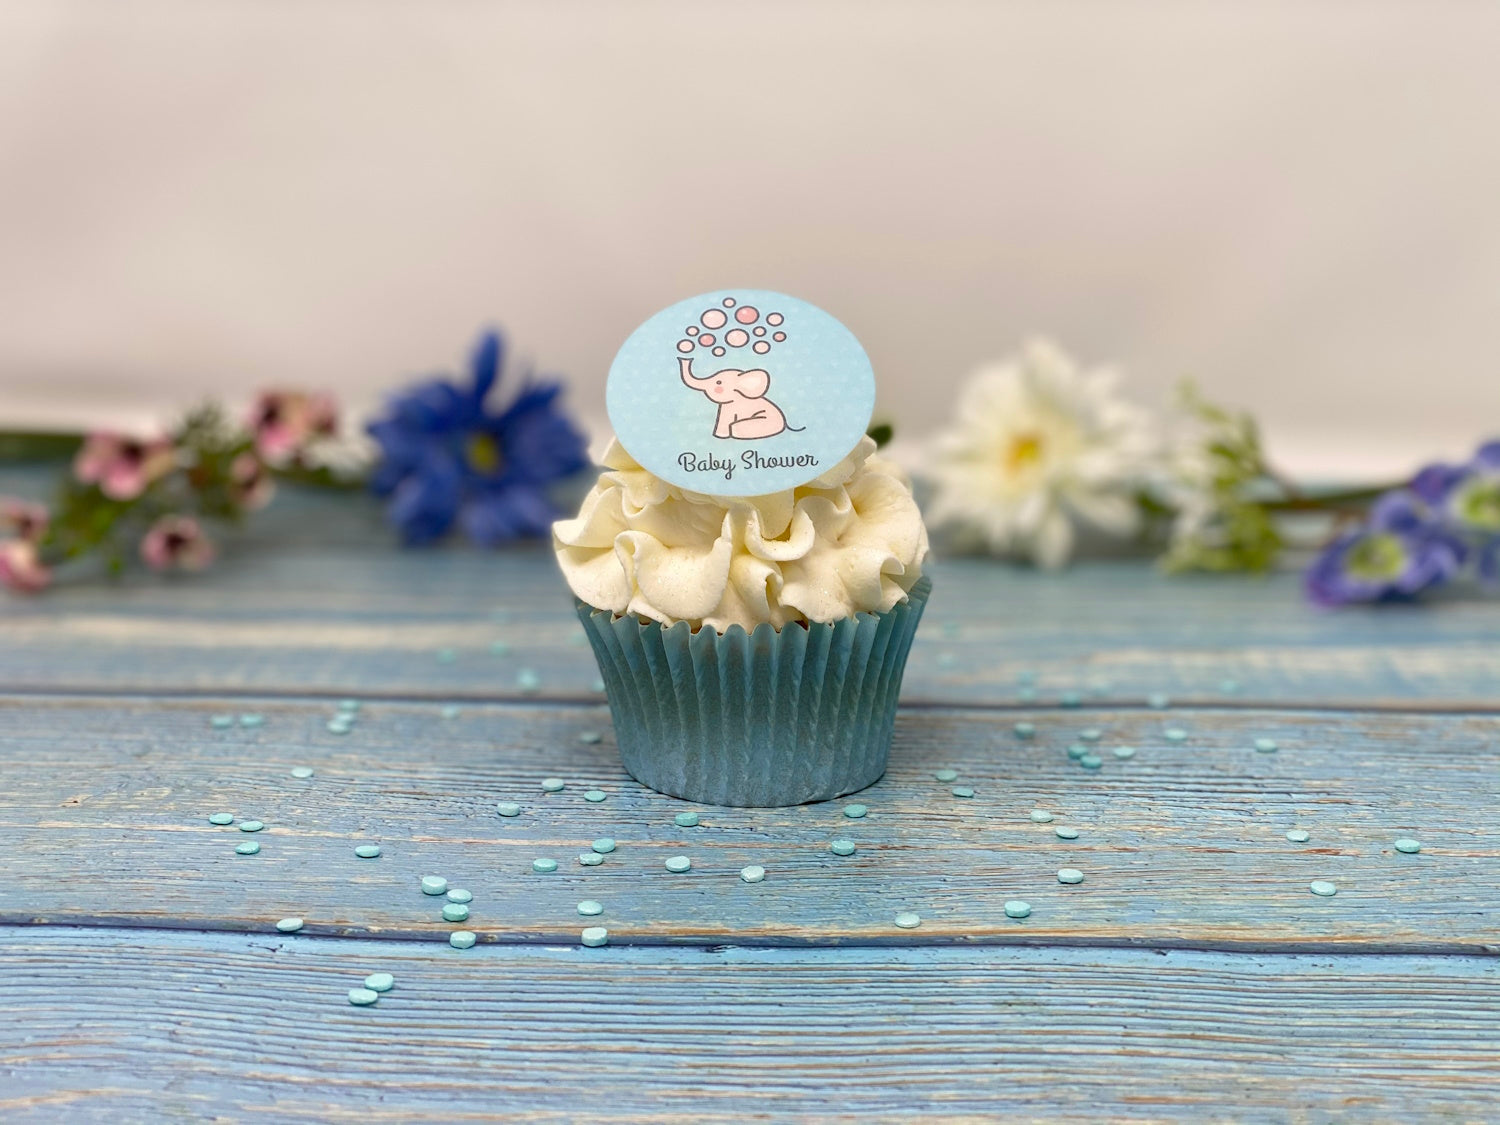 Edible cupcake toppers for a baby shower with a cute elephant design